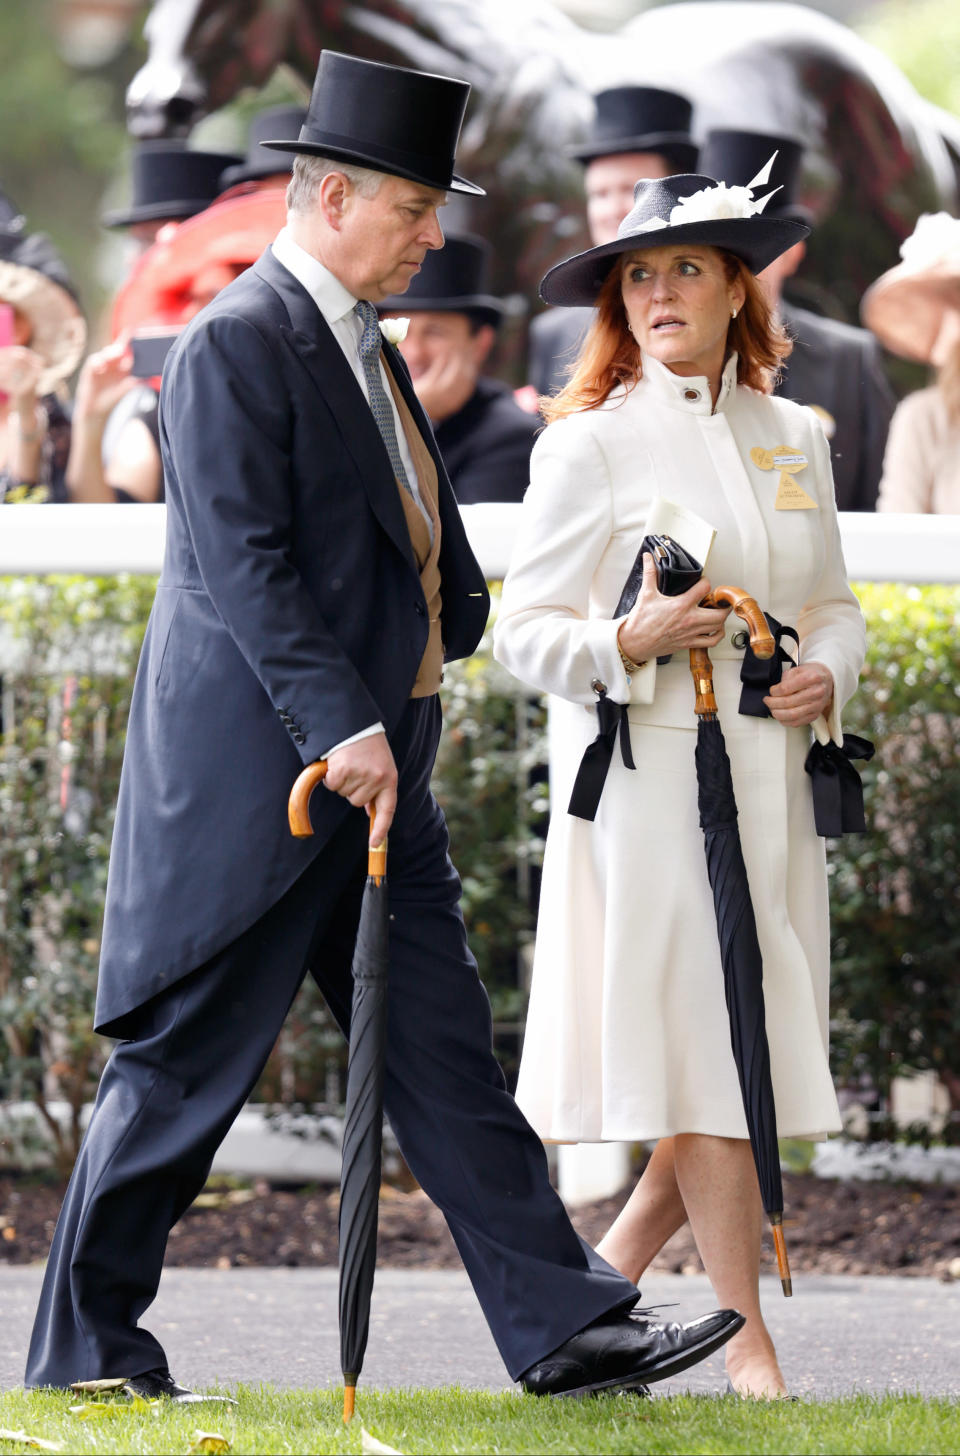 They may have divorced 22 years ago, but Sarah Ferguson and Prince Andrew are still living with each other. Photo: Getty Images